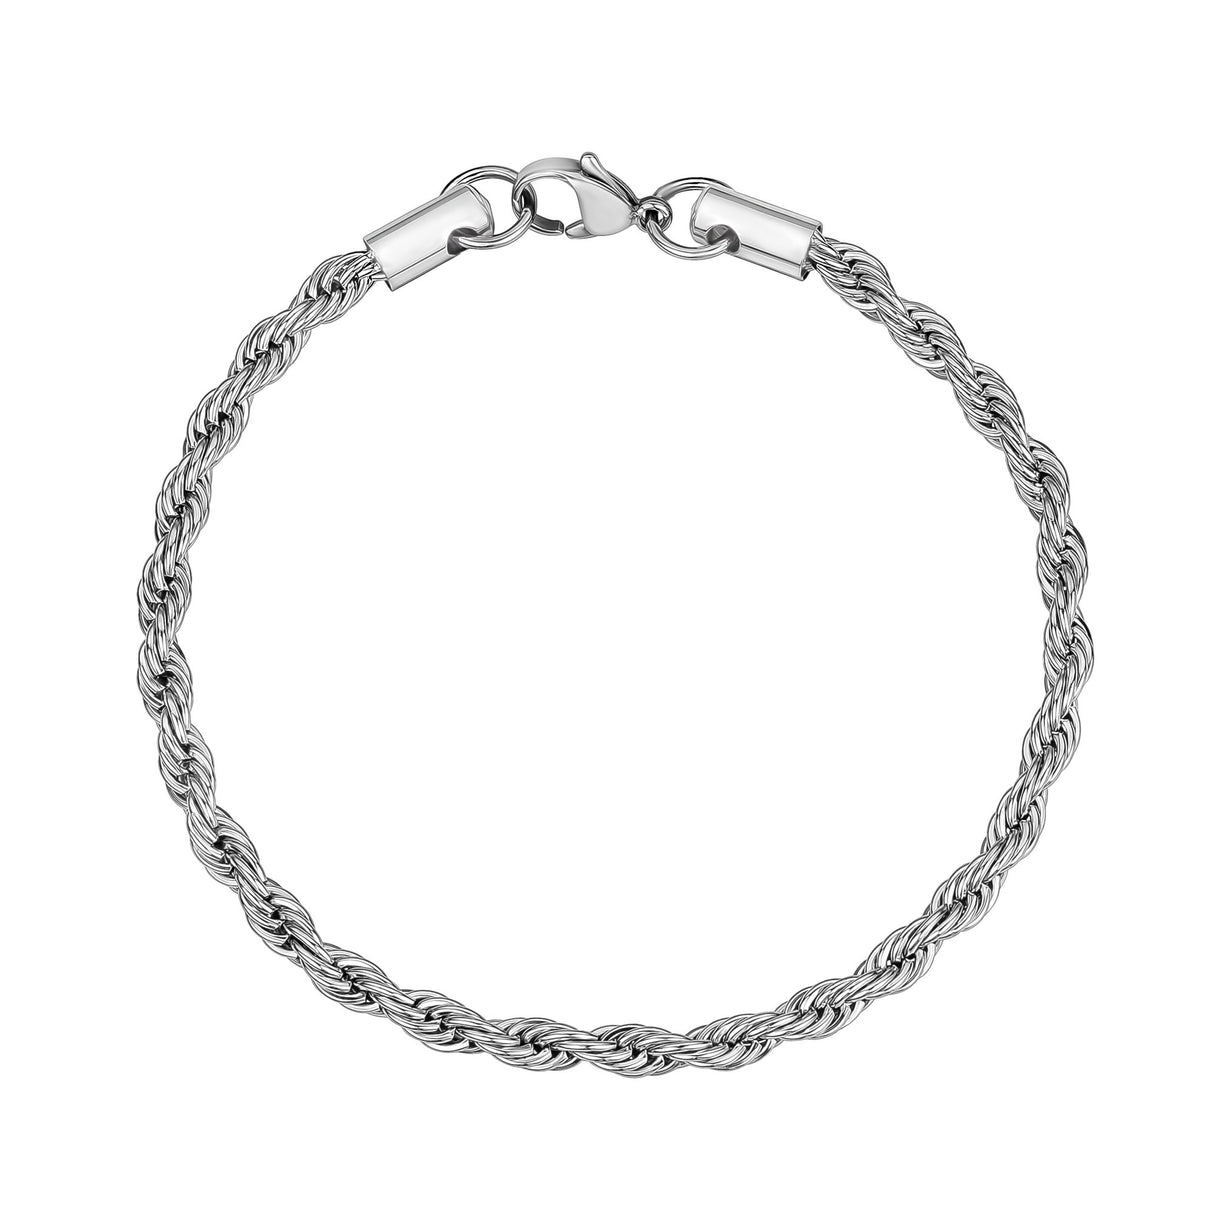 4mm Twisted Rope Stainless Steel Chain Bracelet – The Steel Shop